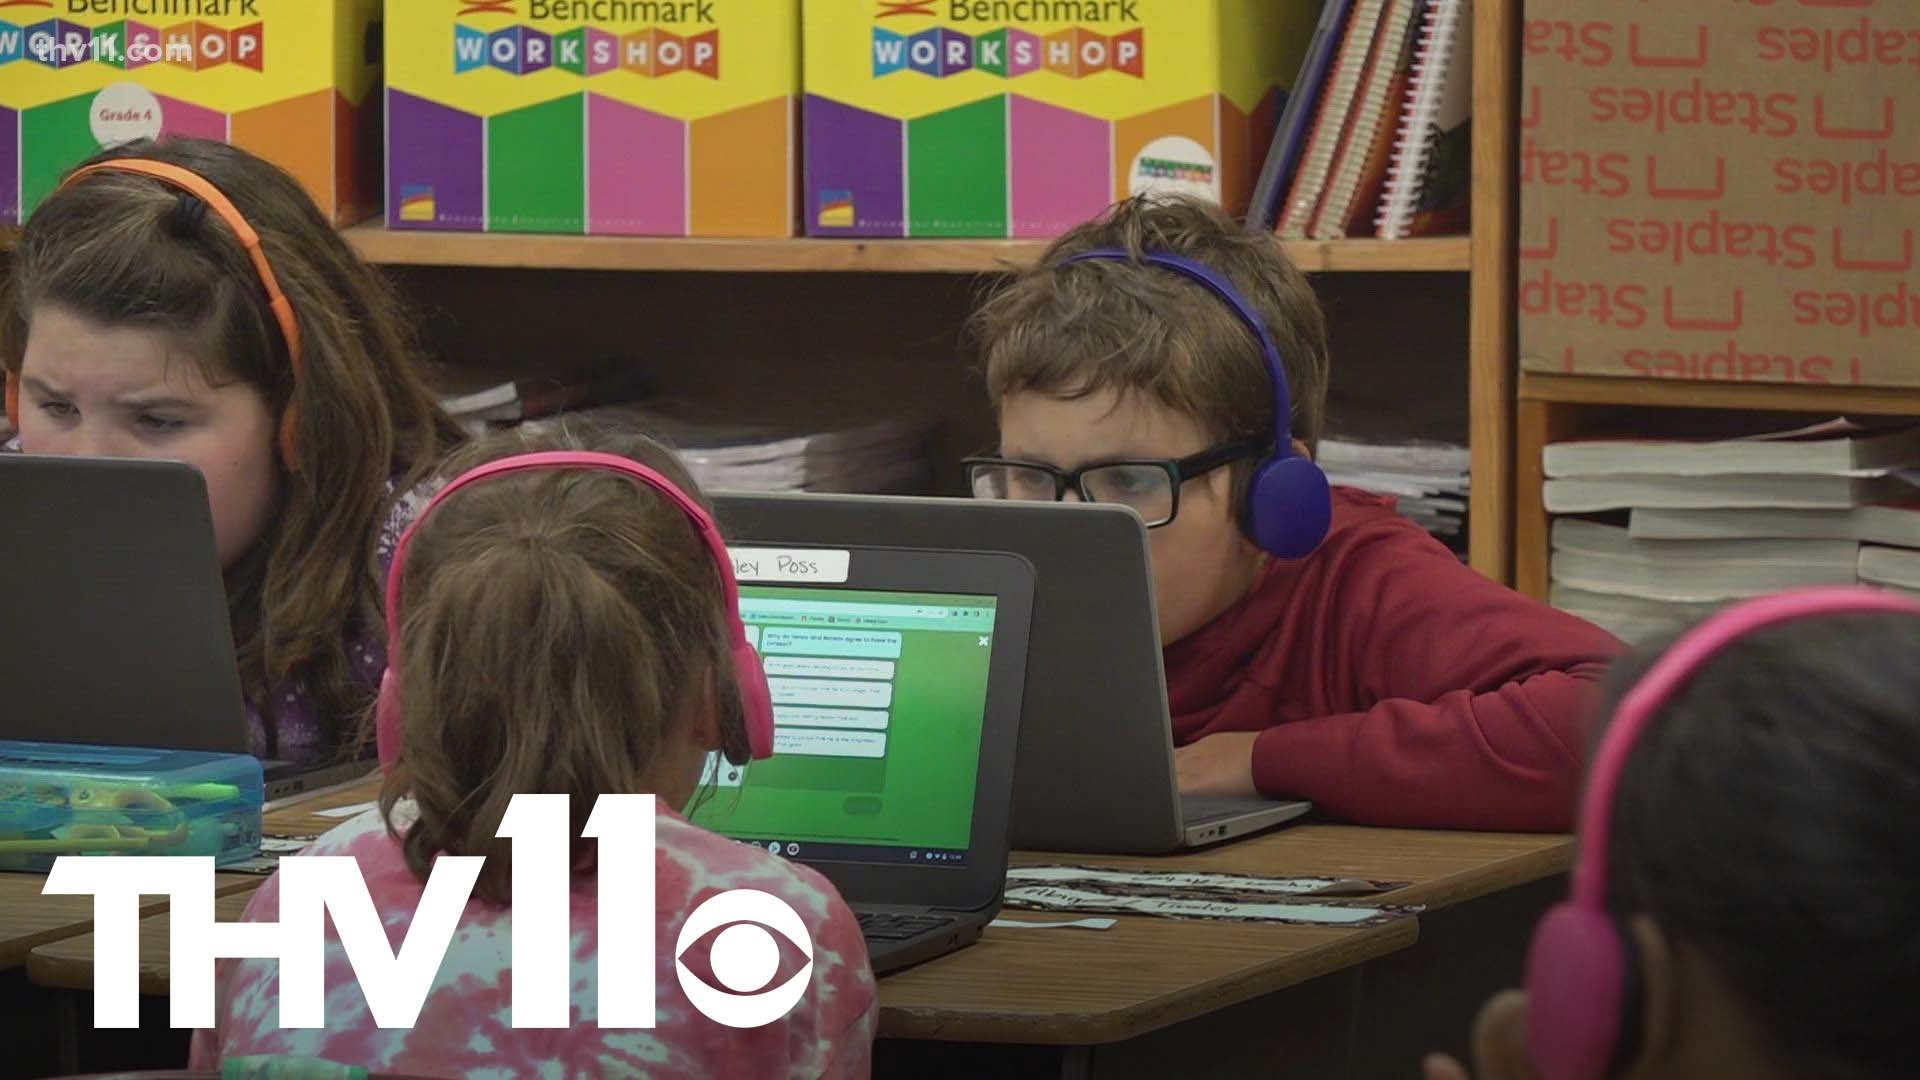 Woodlawn School District in Rison has seen improved scores from students thanks to a collaborative learning method they implemented a few years ago.